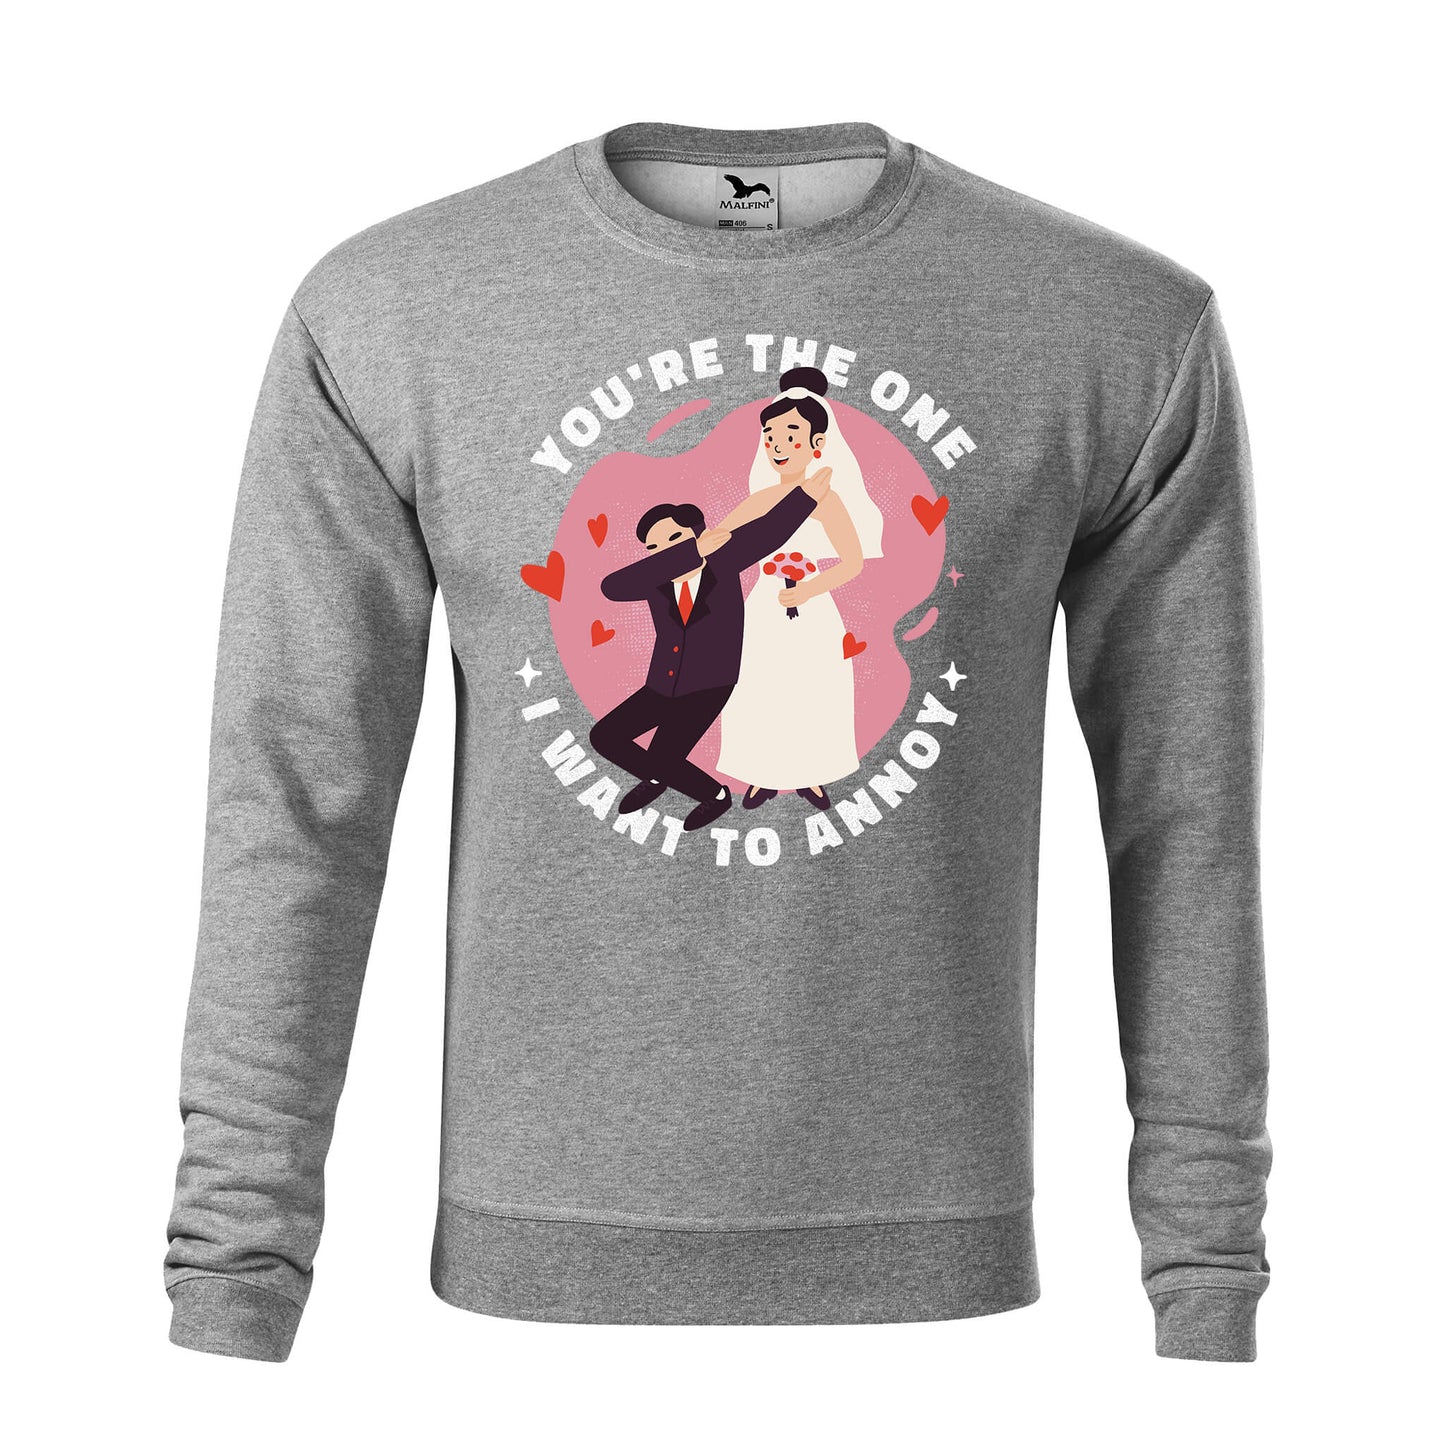 You are the one i want to annoy sweatshirt - rvdesignprint